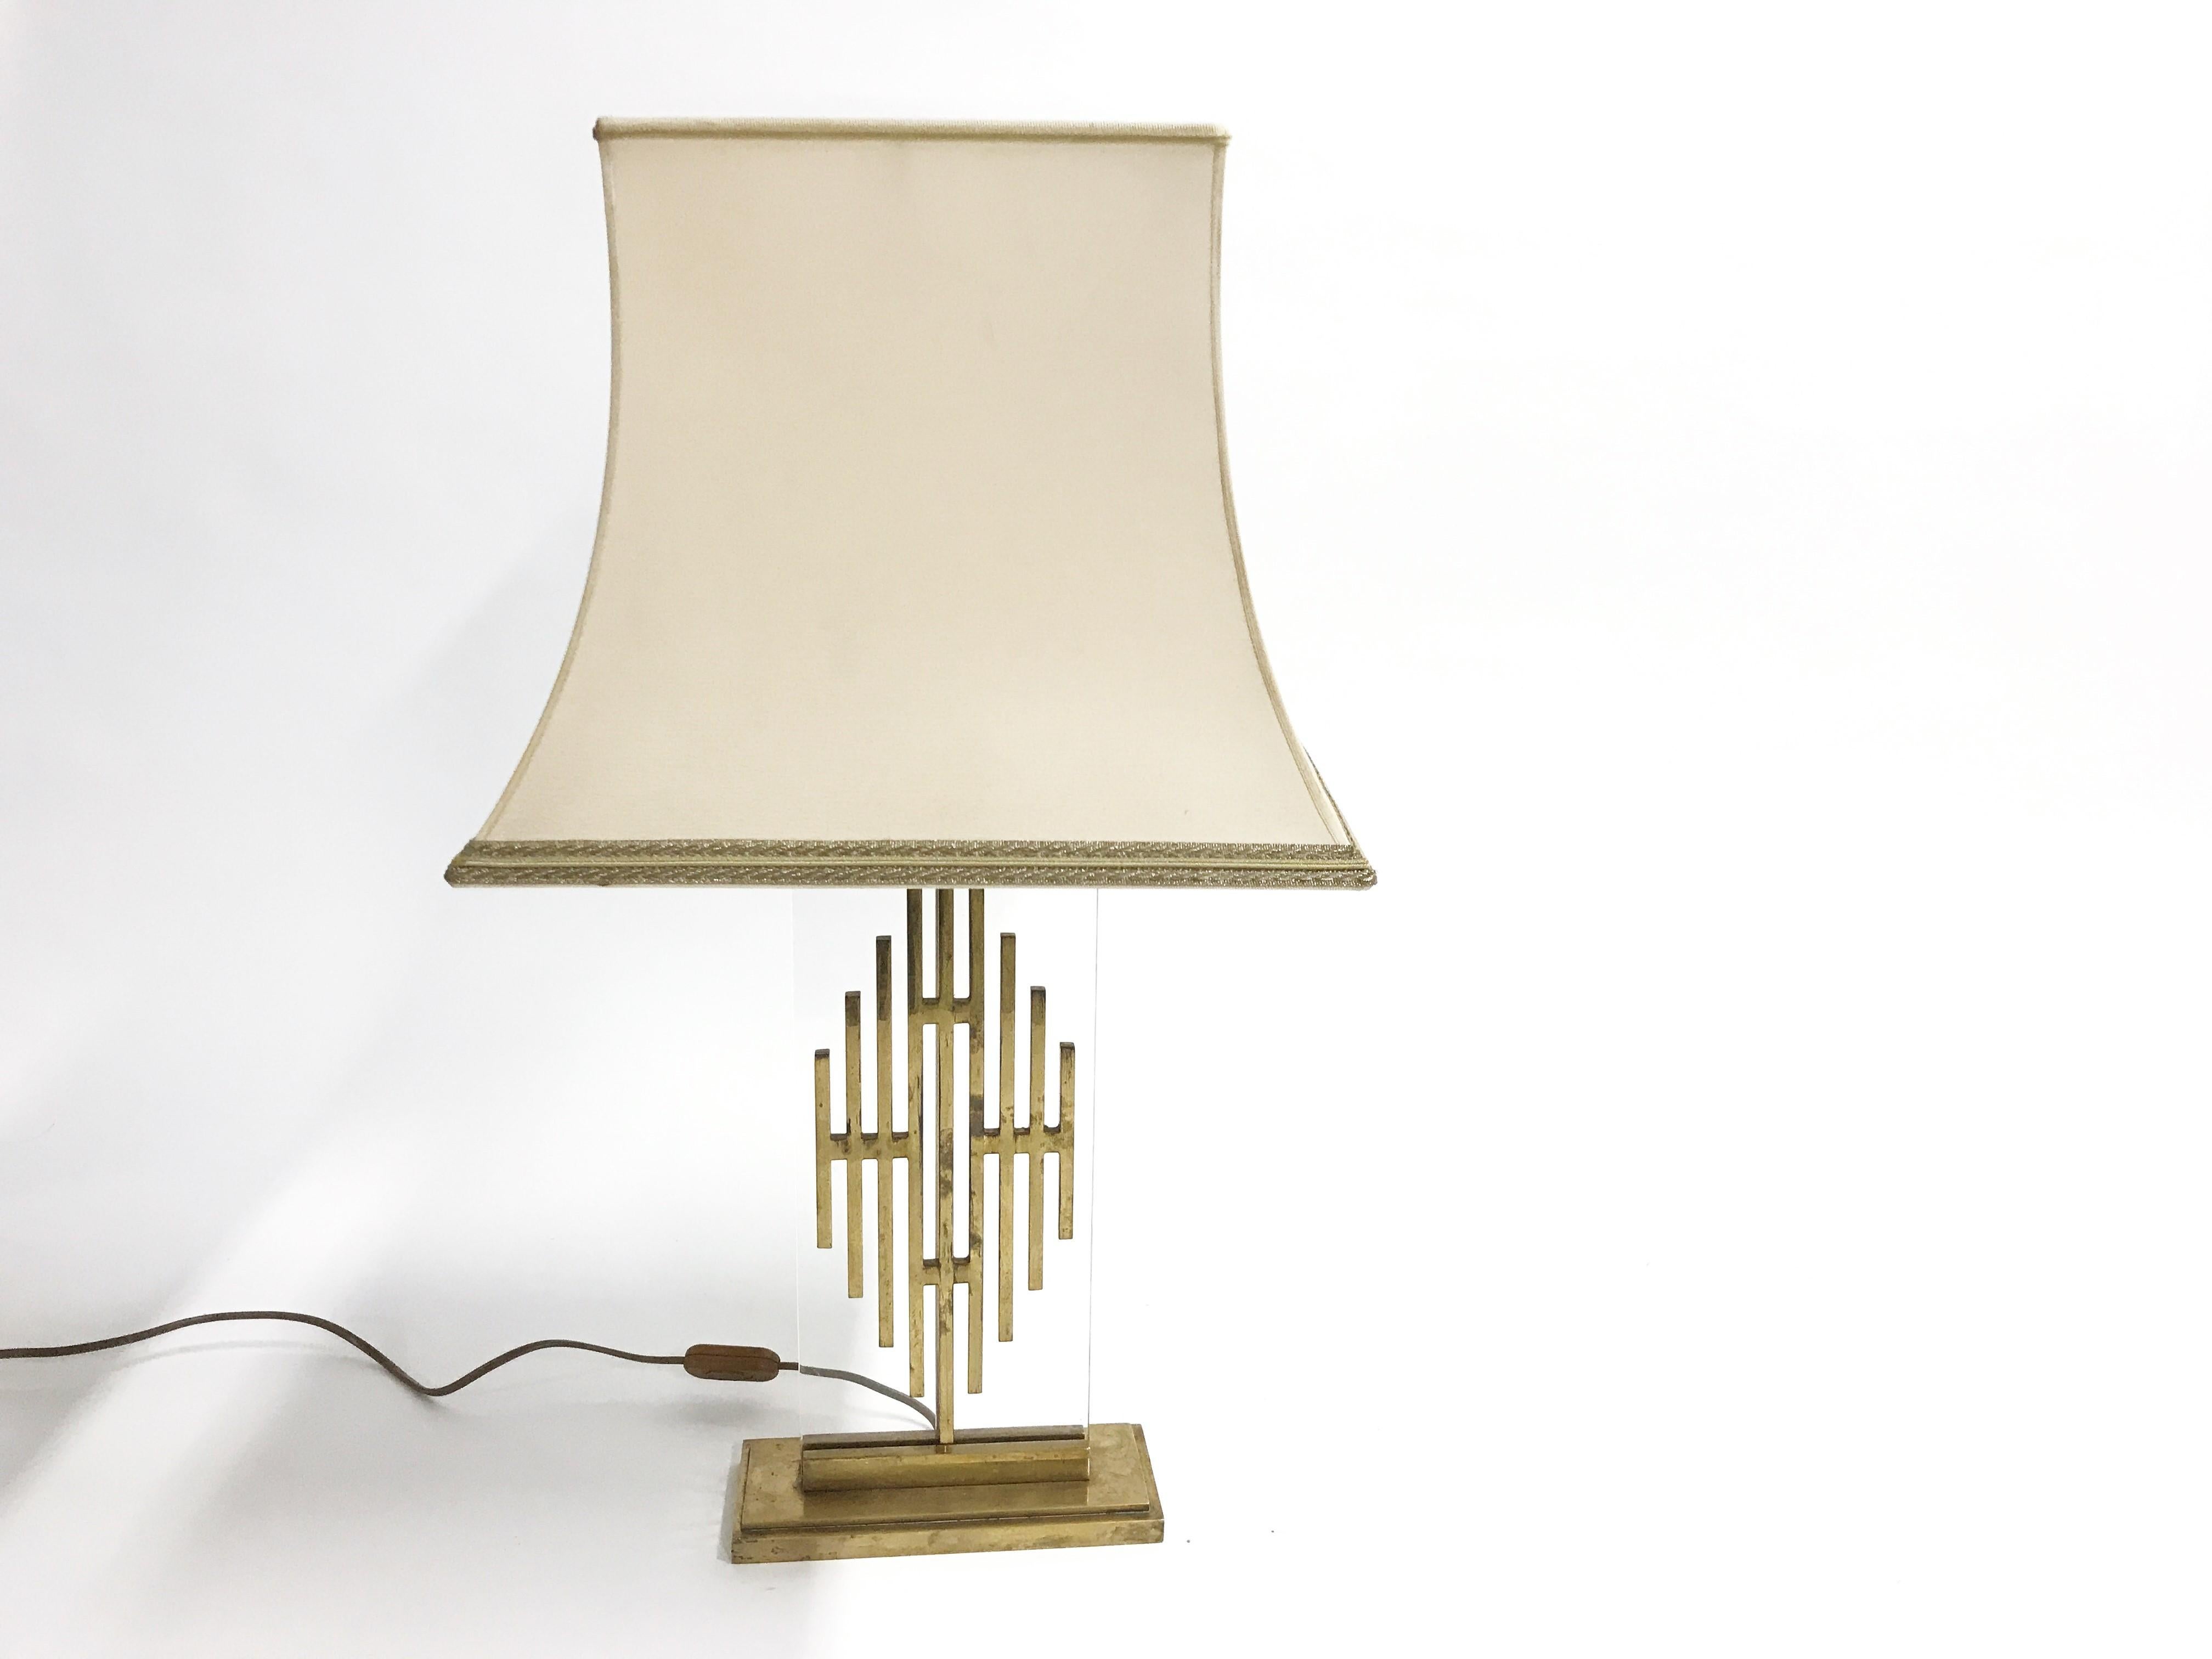 Elegant bronze and Lucite modernist table lamp.

Beautiful patina.

The use of the Lucite makes the sculpture 'float'

The lamp has it's original fabric lamp shade.

To be used with a regular E27 light bulb.

Tested and ready to